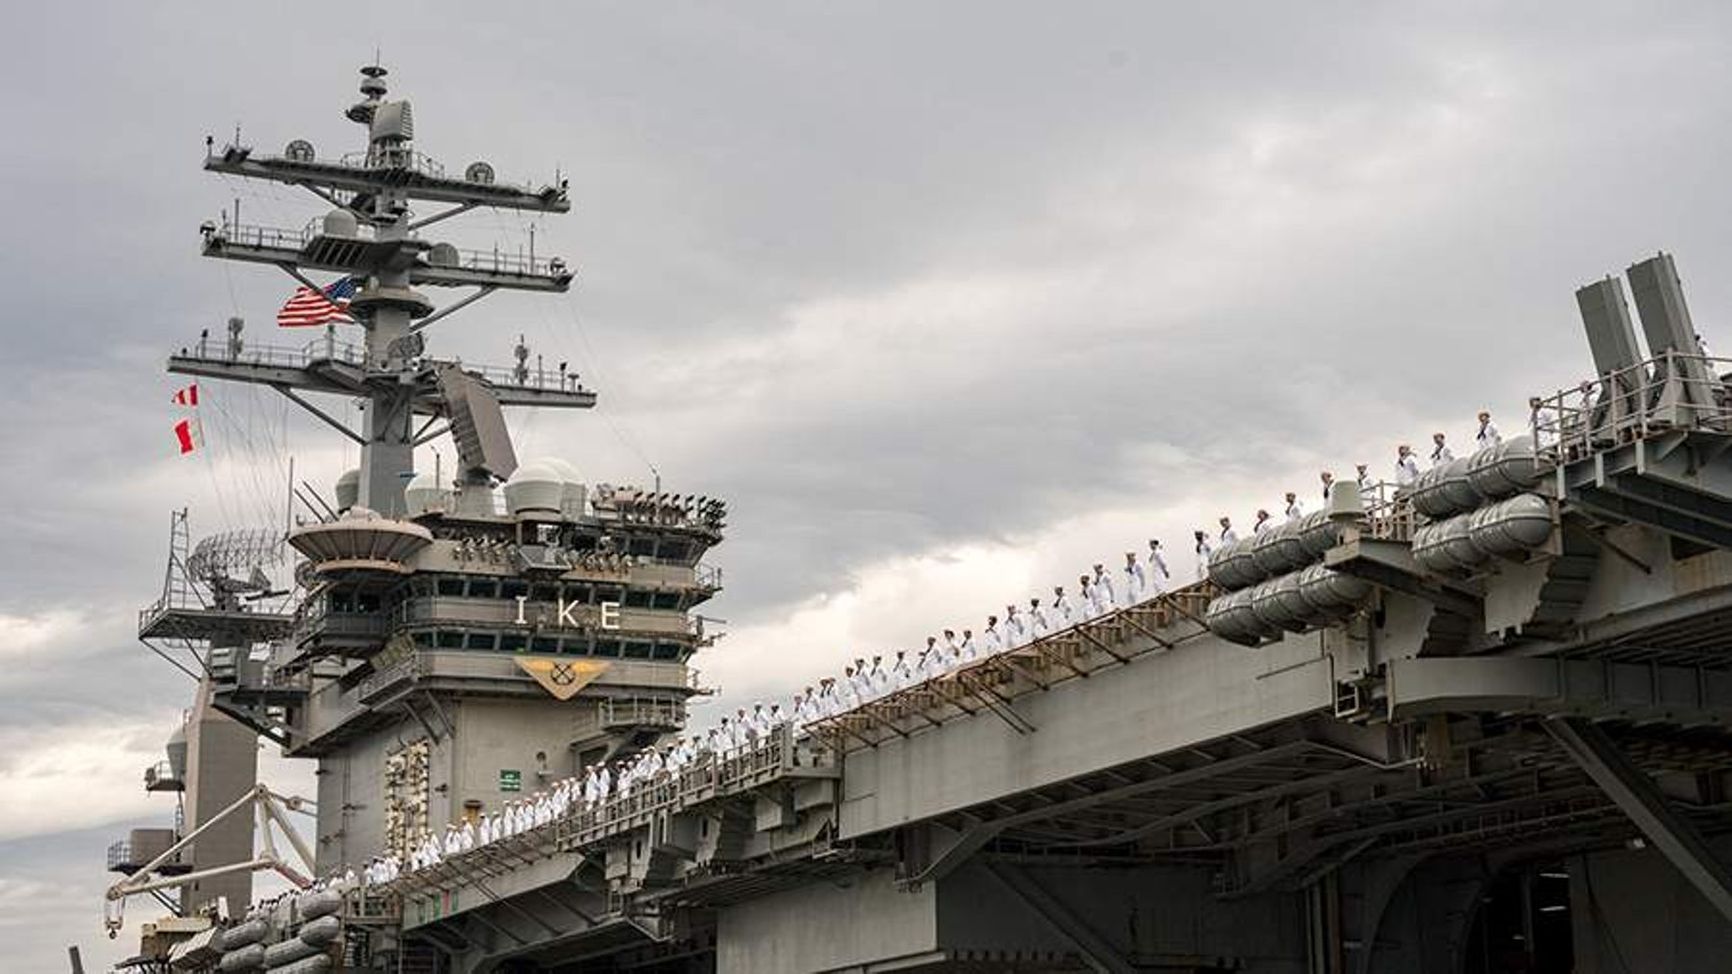 The nuclear aircraft carrier USS Eisenhower set sail for the Mediterranean Sea on October 14, 2023